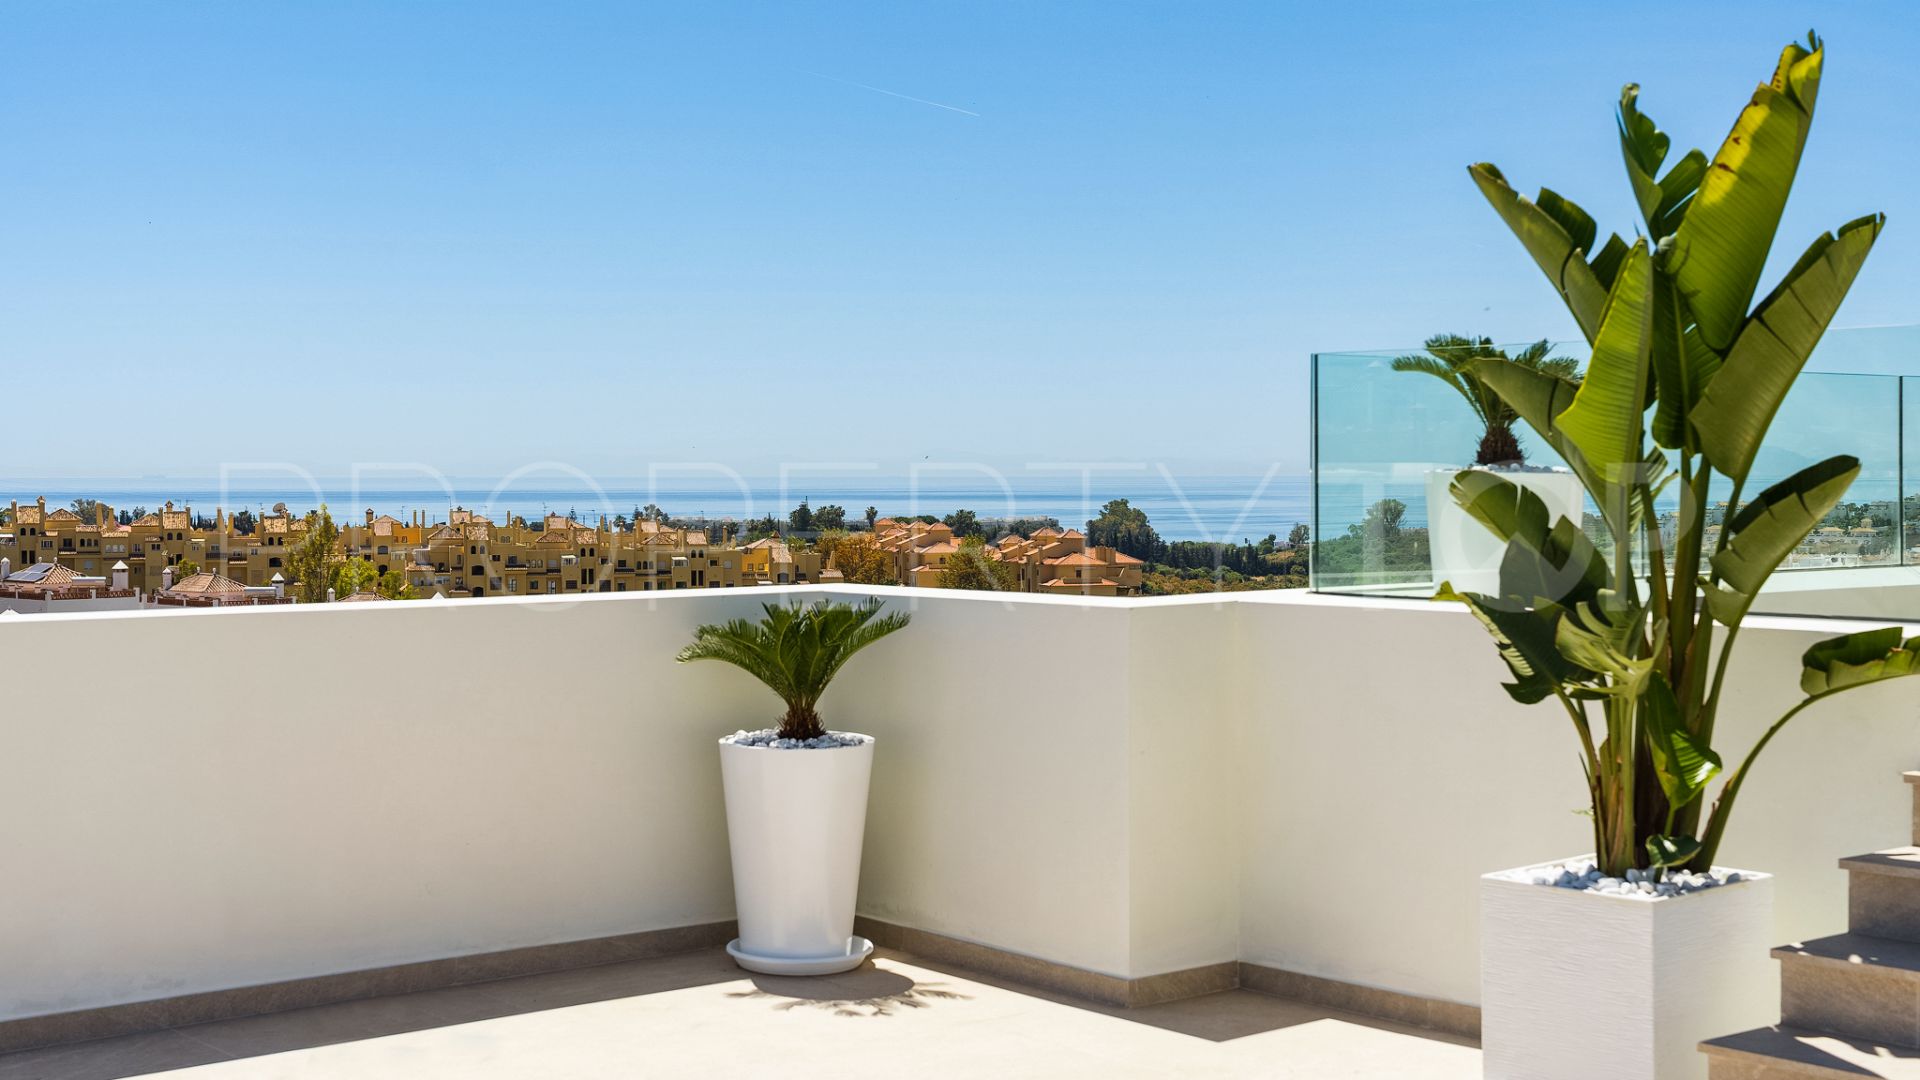 For sale villa with 4 bedrooms in Estepona